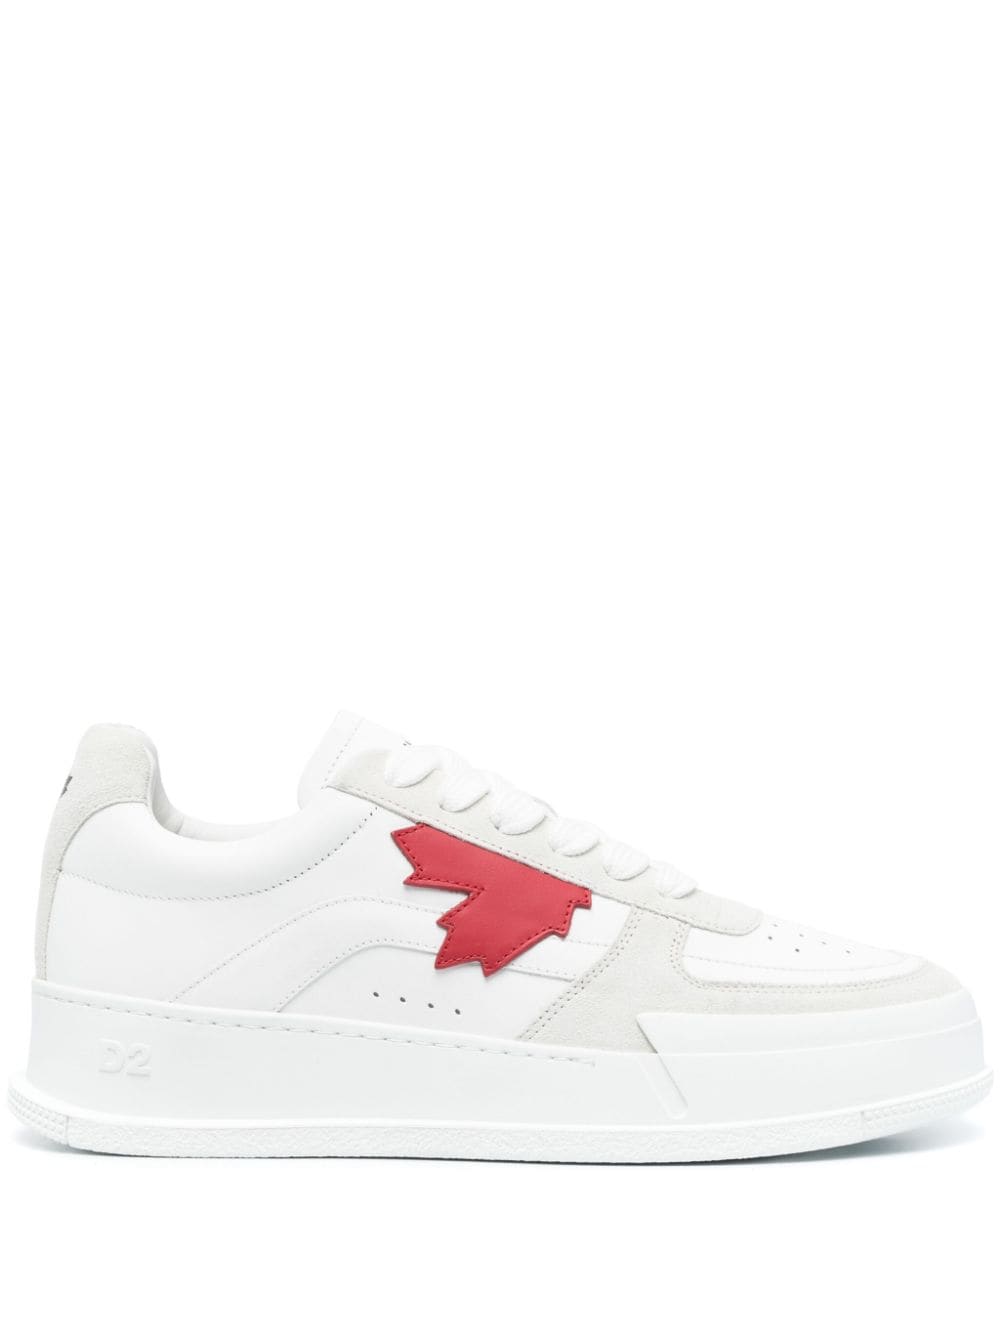 Canadian leather sneakers